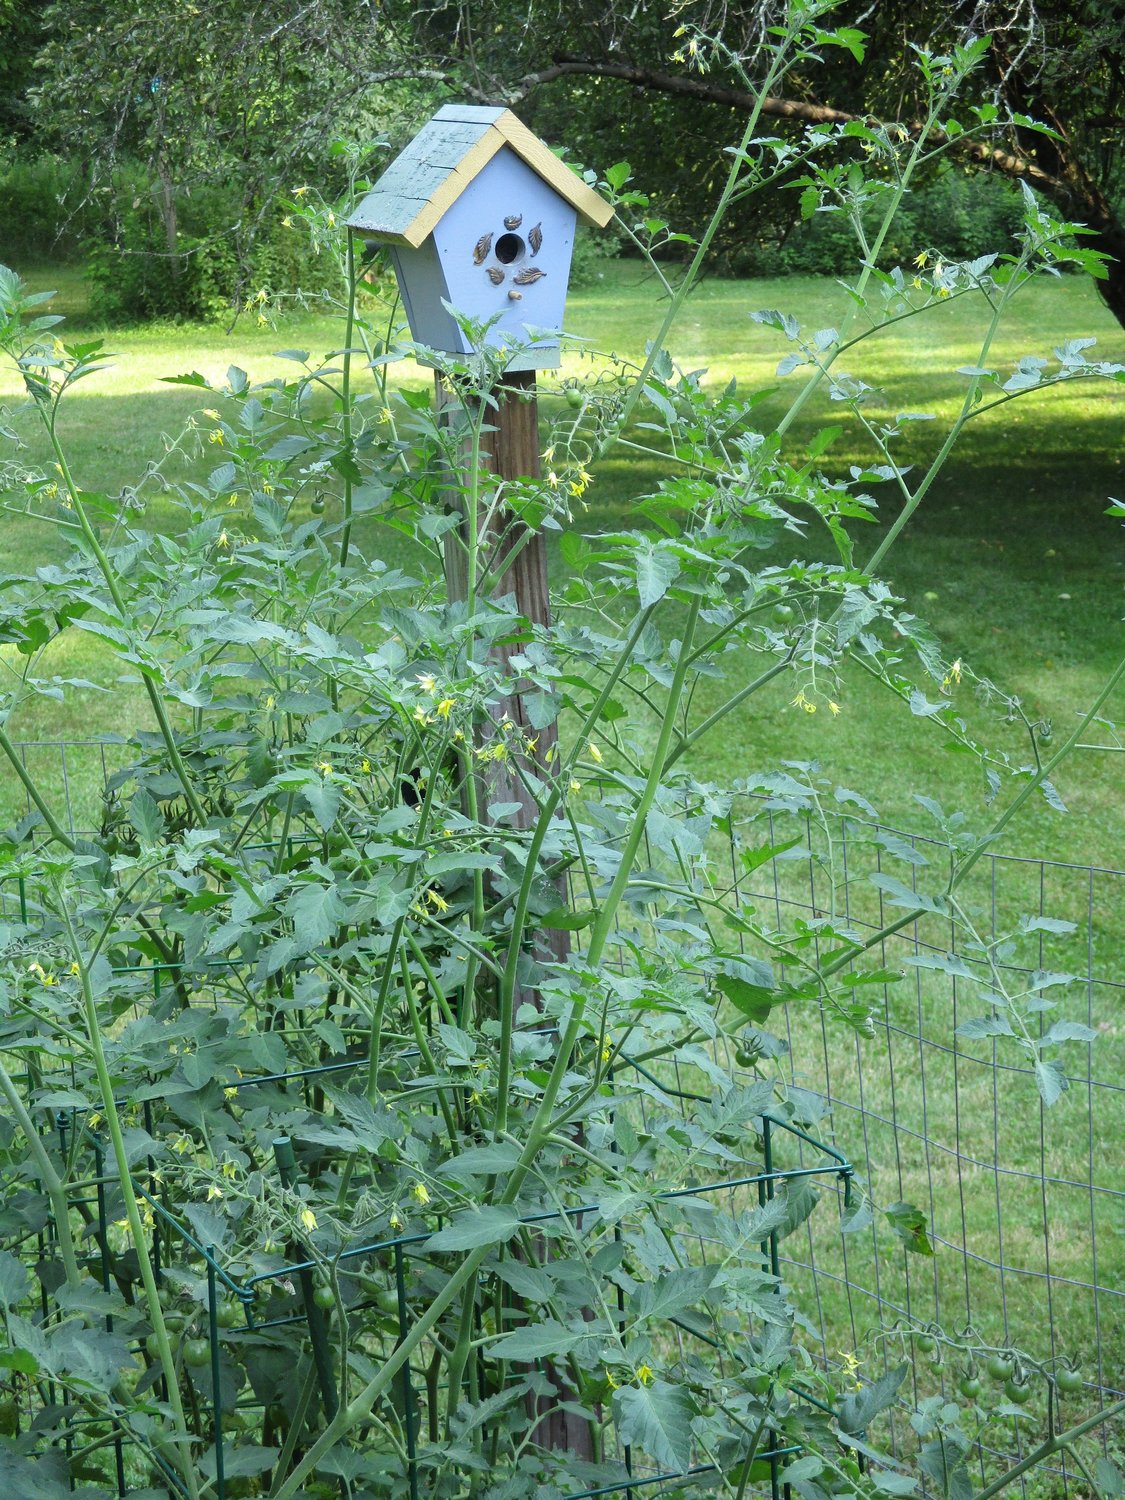 Sun Gold tomato plant grew to over six feet tall.